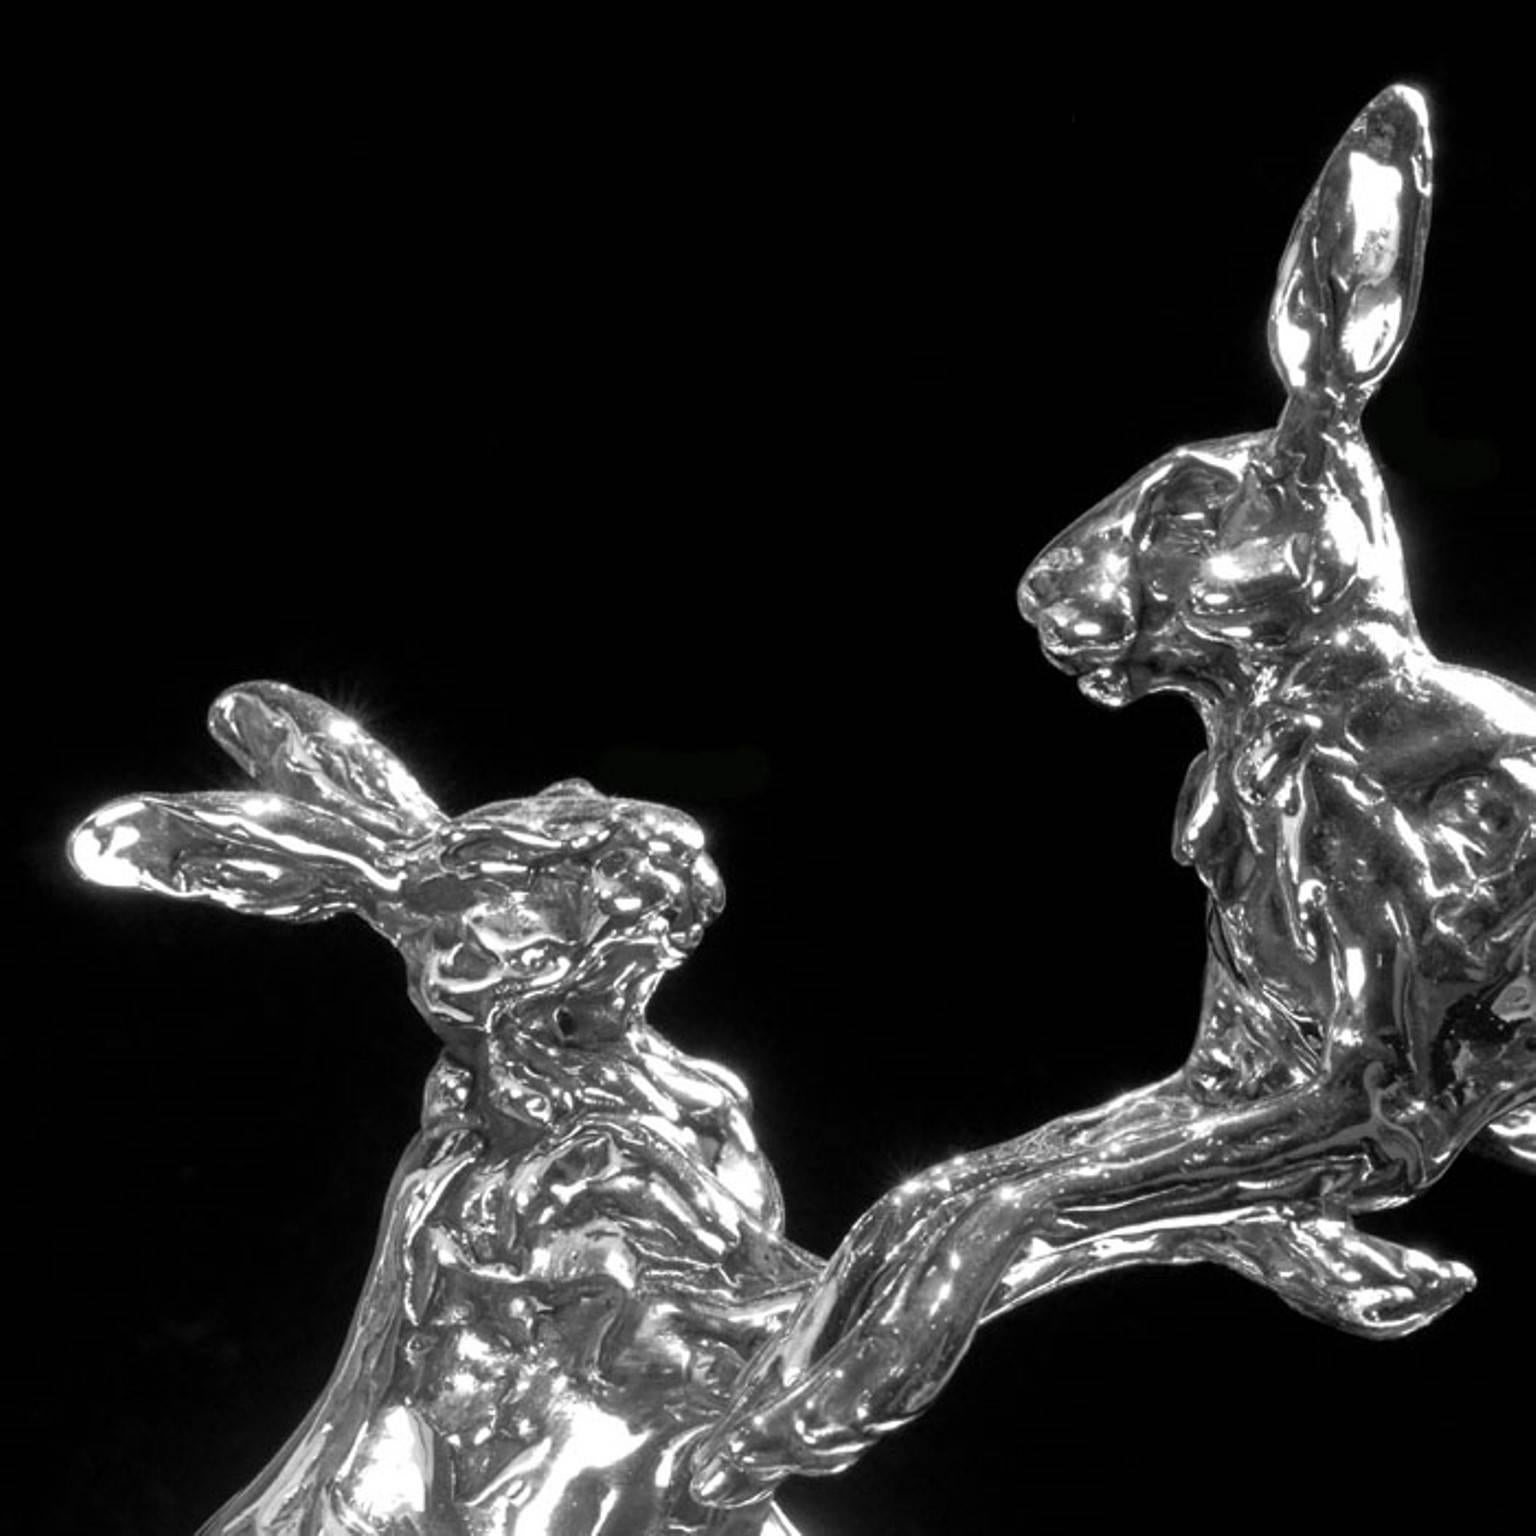 Lucy Kinsella 'Leaping Hares' sterling silver sculpture 2